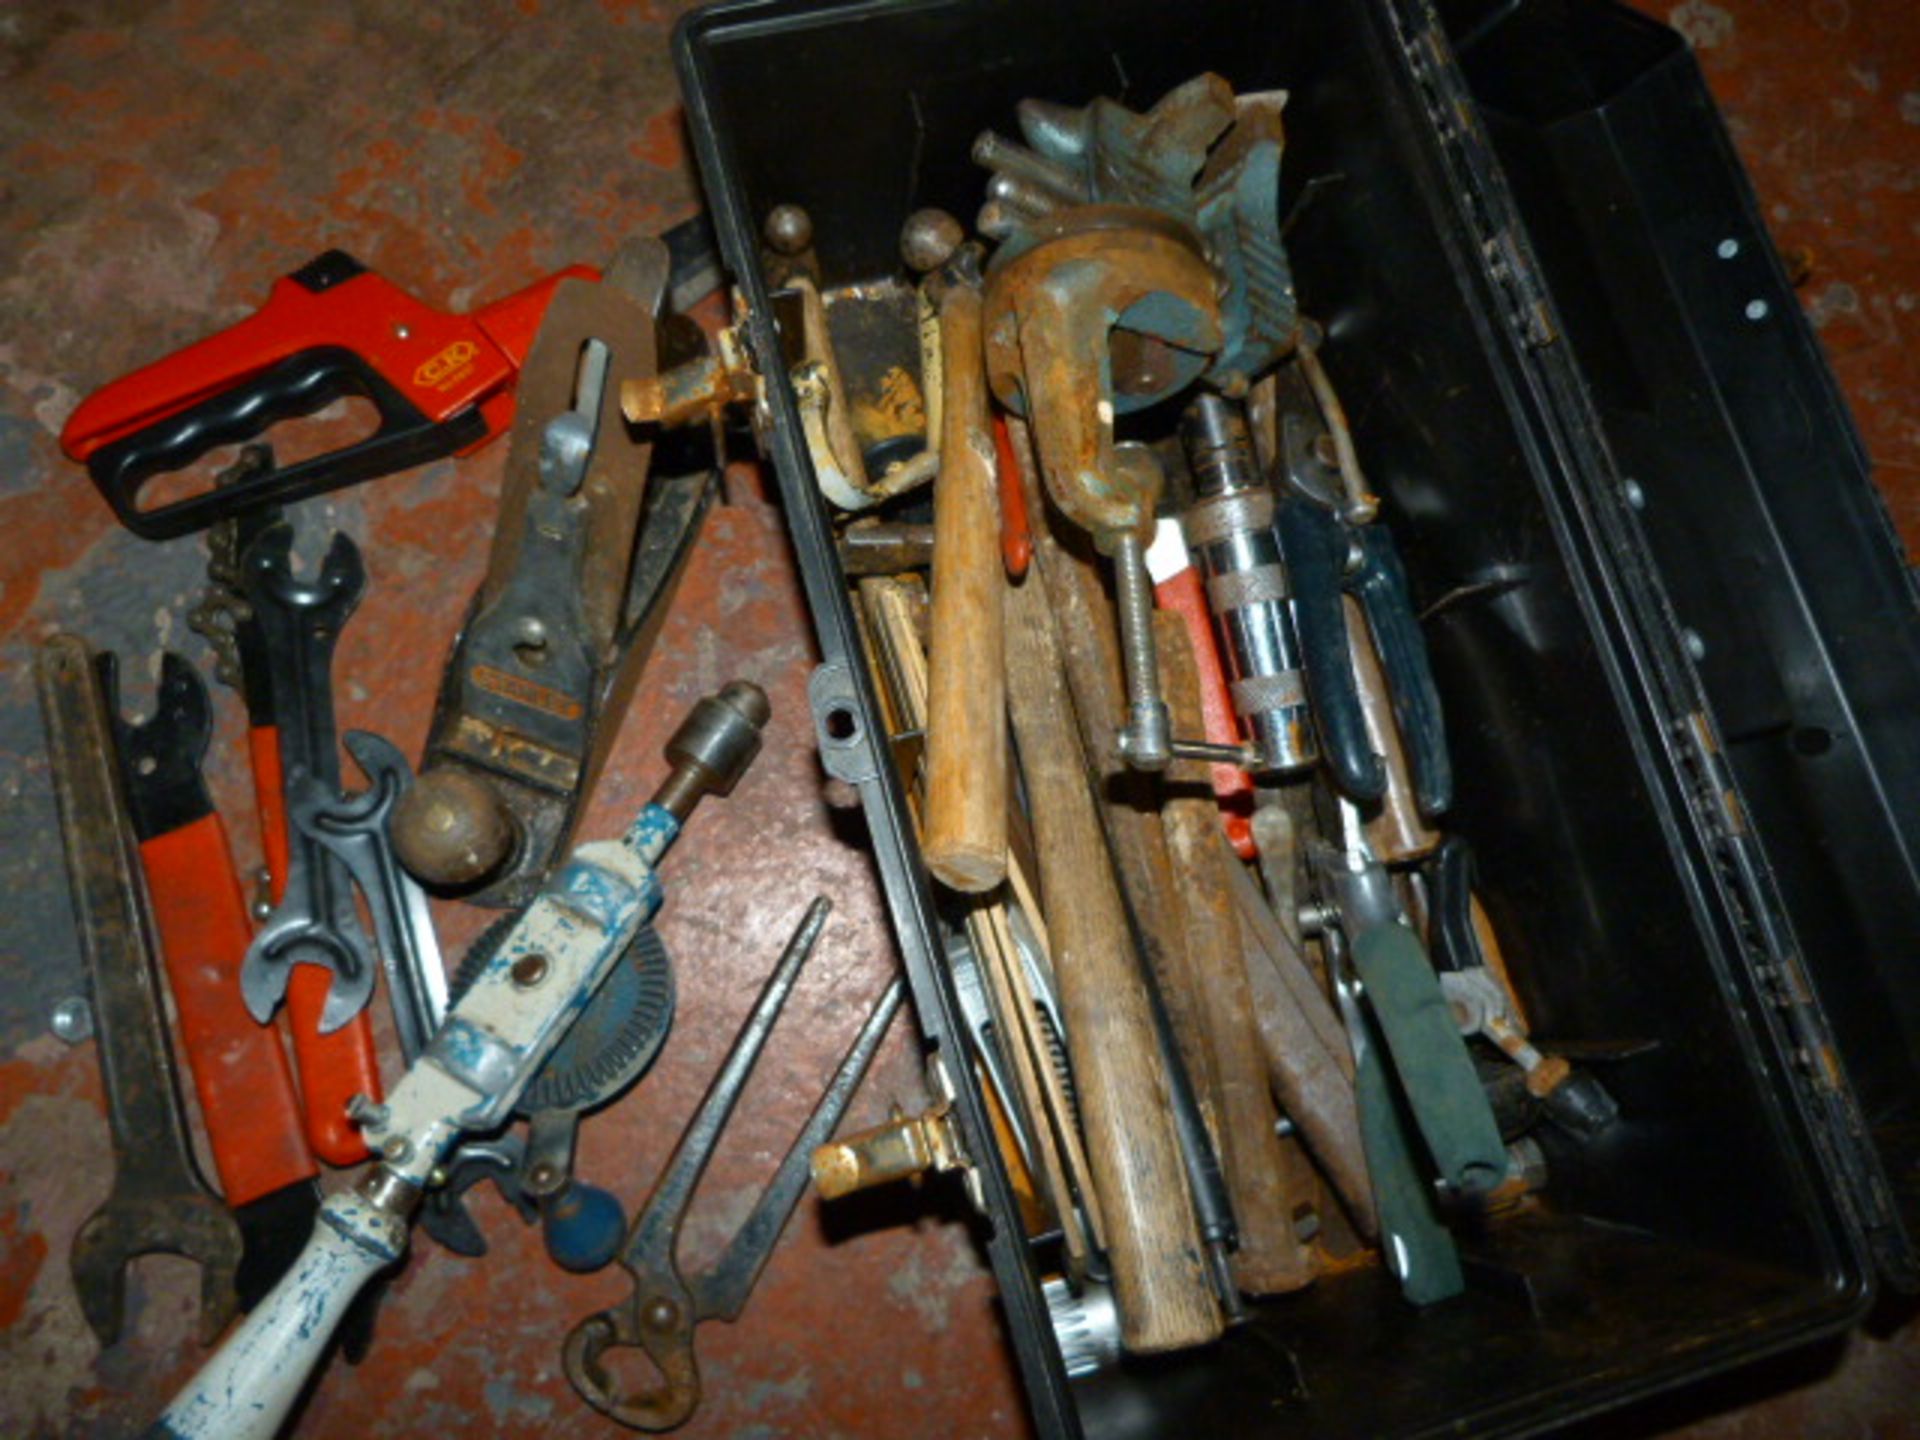 Toolbox with Stanley Plane, Spanners, and Assorted